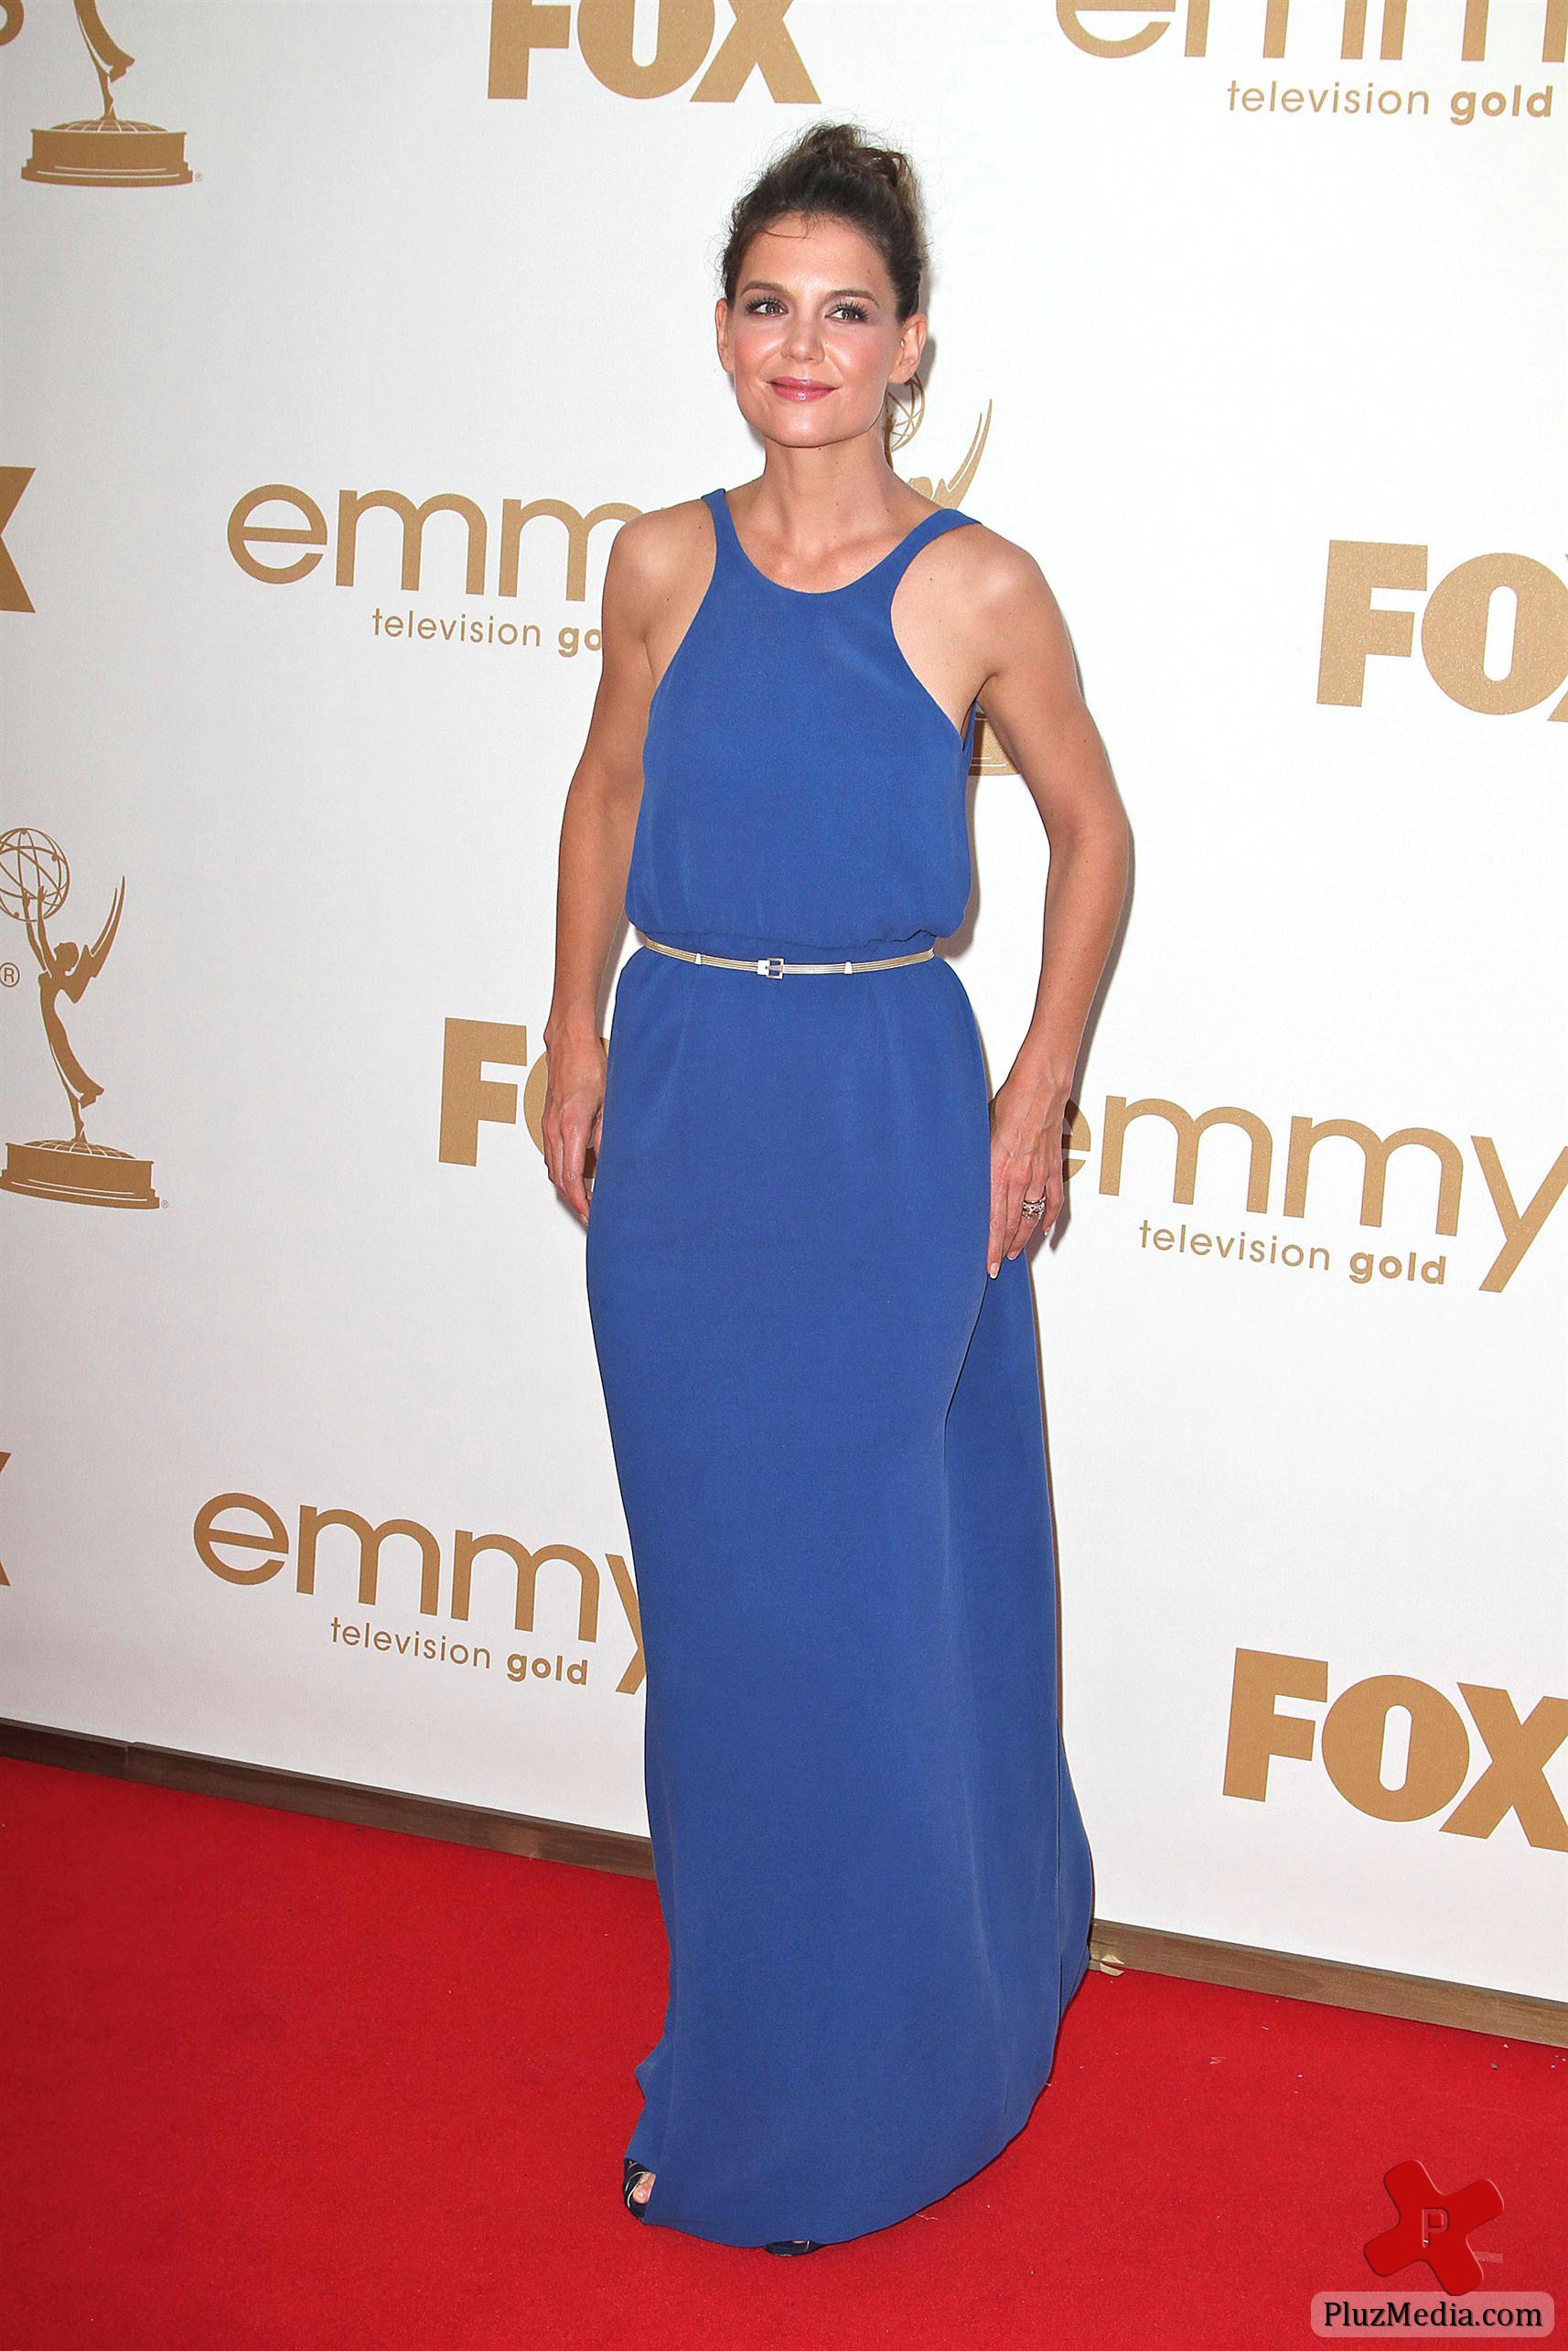 63rd Primetime Emmy Awards held at the Nokia Theater - Arrivals photos | Picture 81063